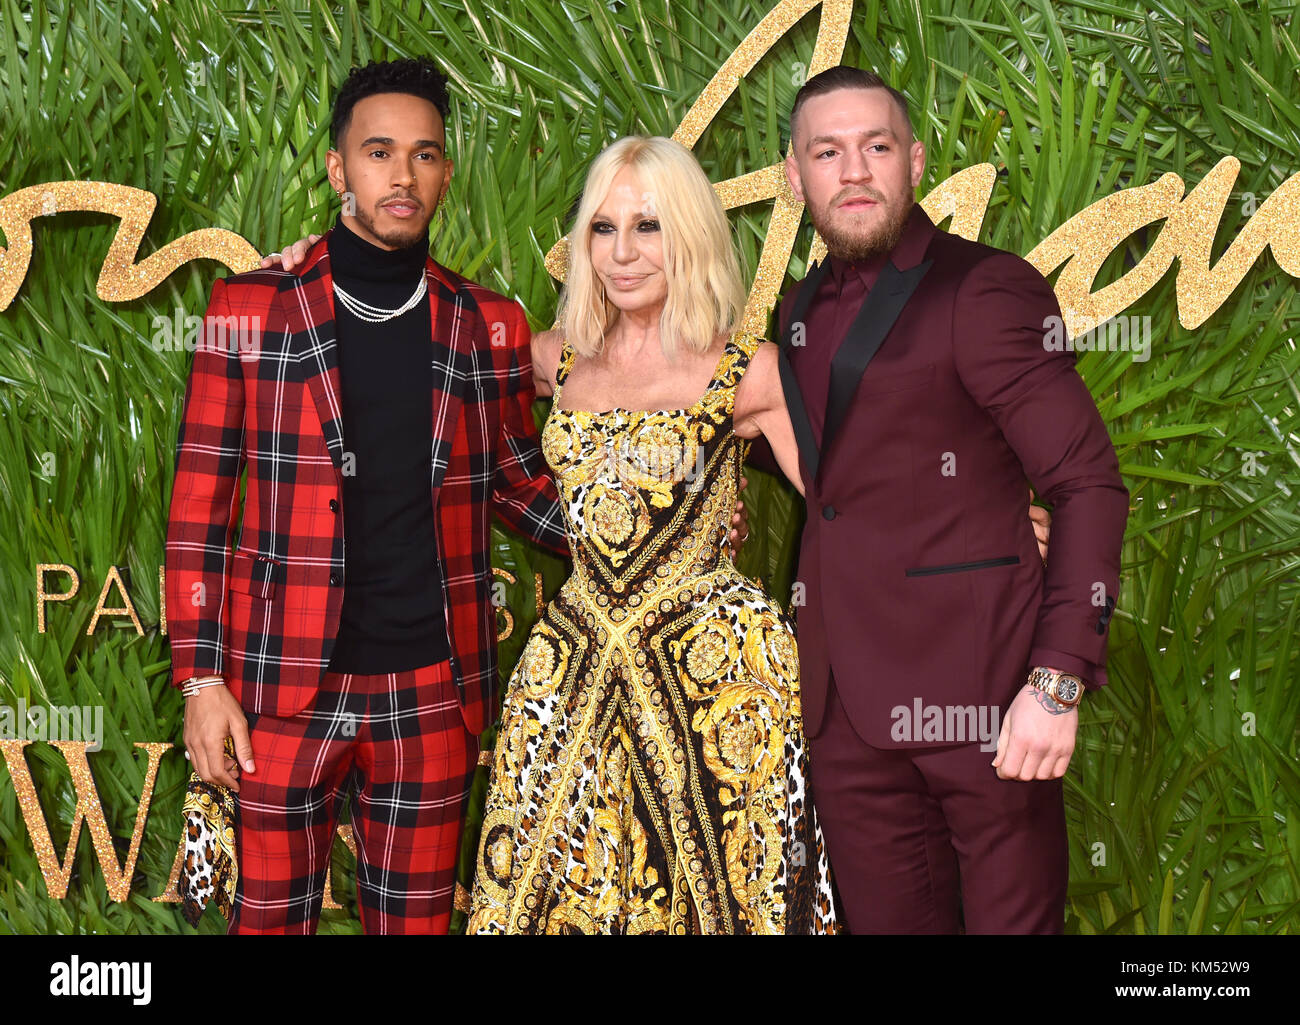 Lewis Hamilton, Donatella Versace and Conor McGregor attending the Fashion  Awards 2017, in partnership with Swarovski, held at the Royal Albert Hall,  London. Picture Date: Monday 4th December, 2017. Photo credit should